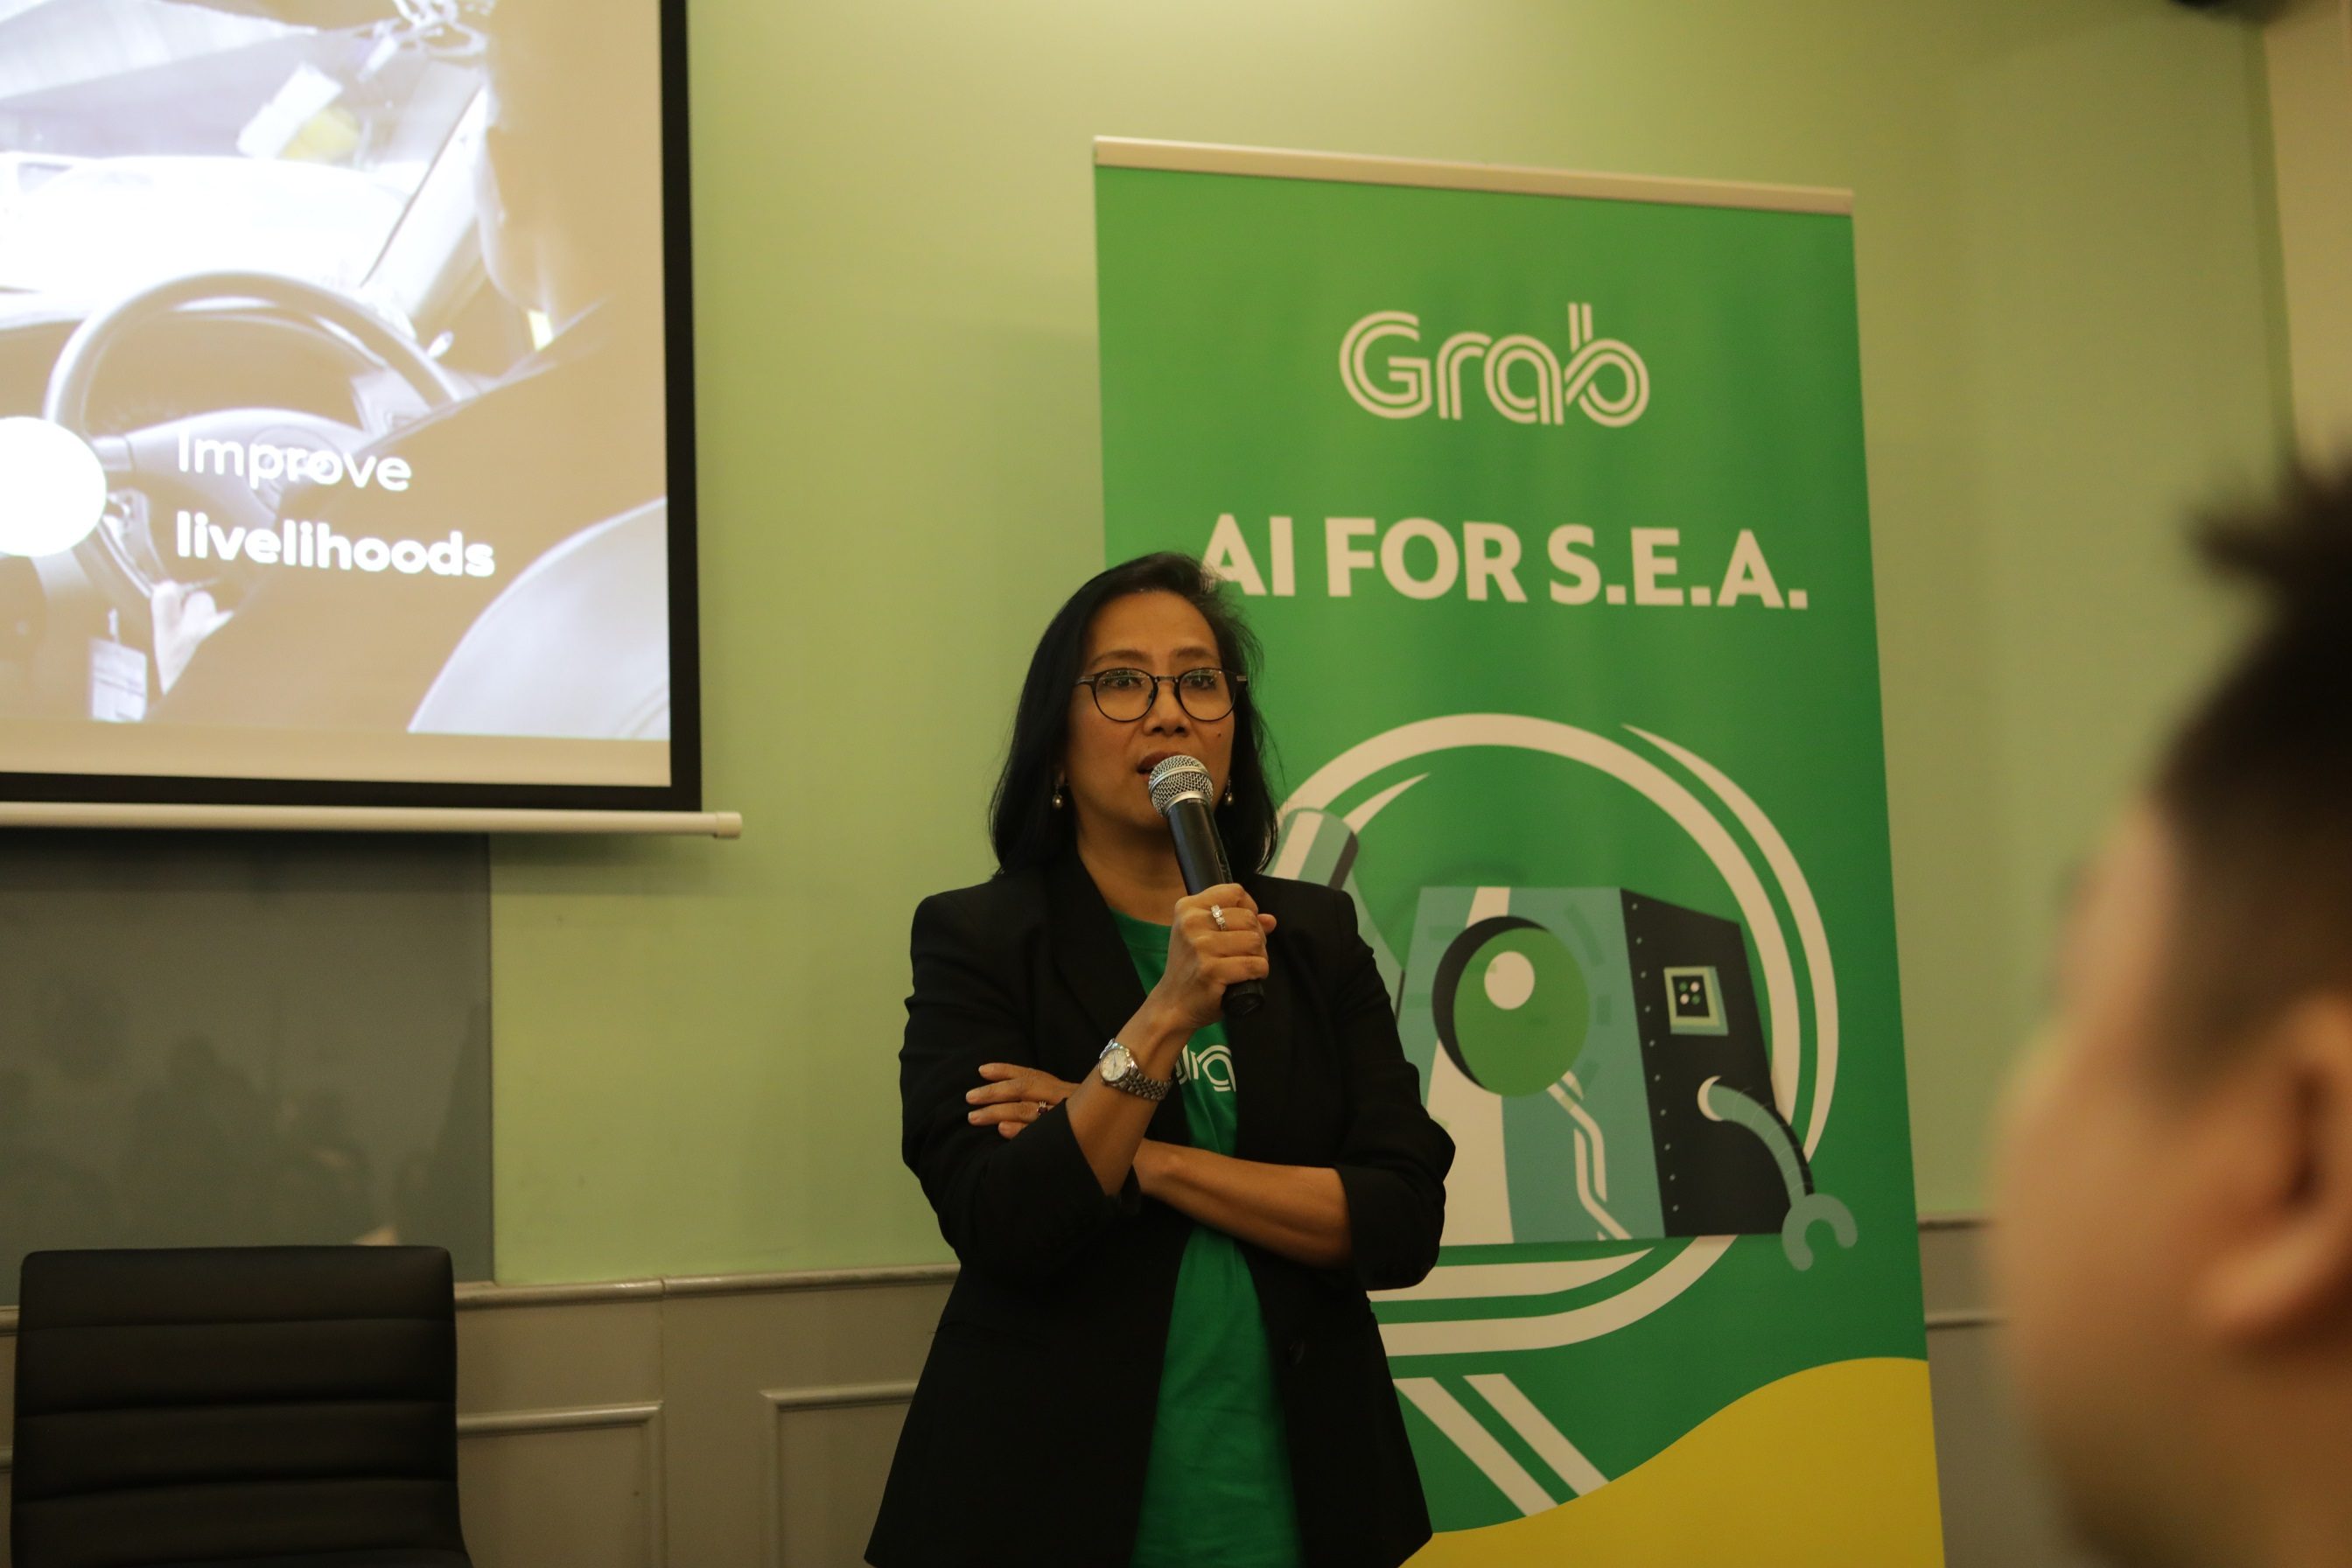 SEA Digest: Grab rolls out AI competition; Bukalapak partners MoEngage